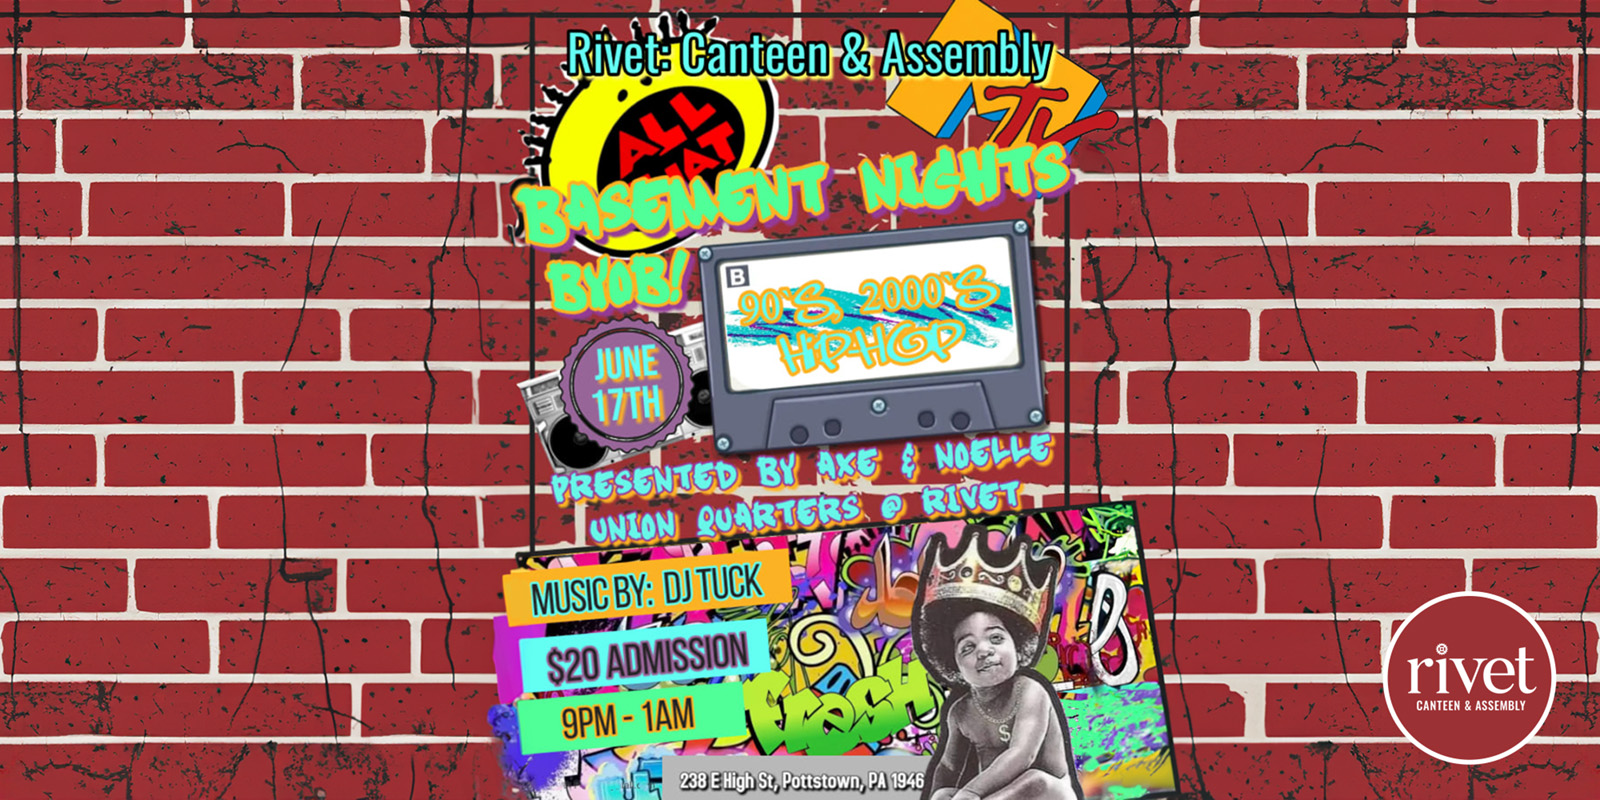 Basement Nights @ Rivet: Canteen & Assembly in the Union Quarters on Saturday, June 17th, 2023. Be there!